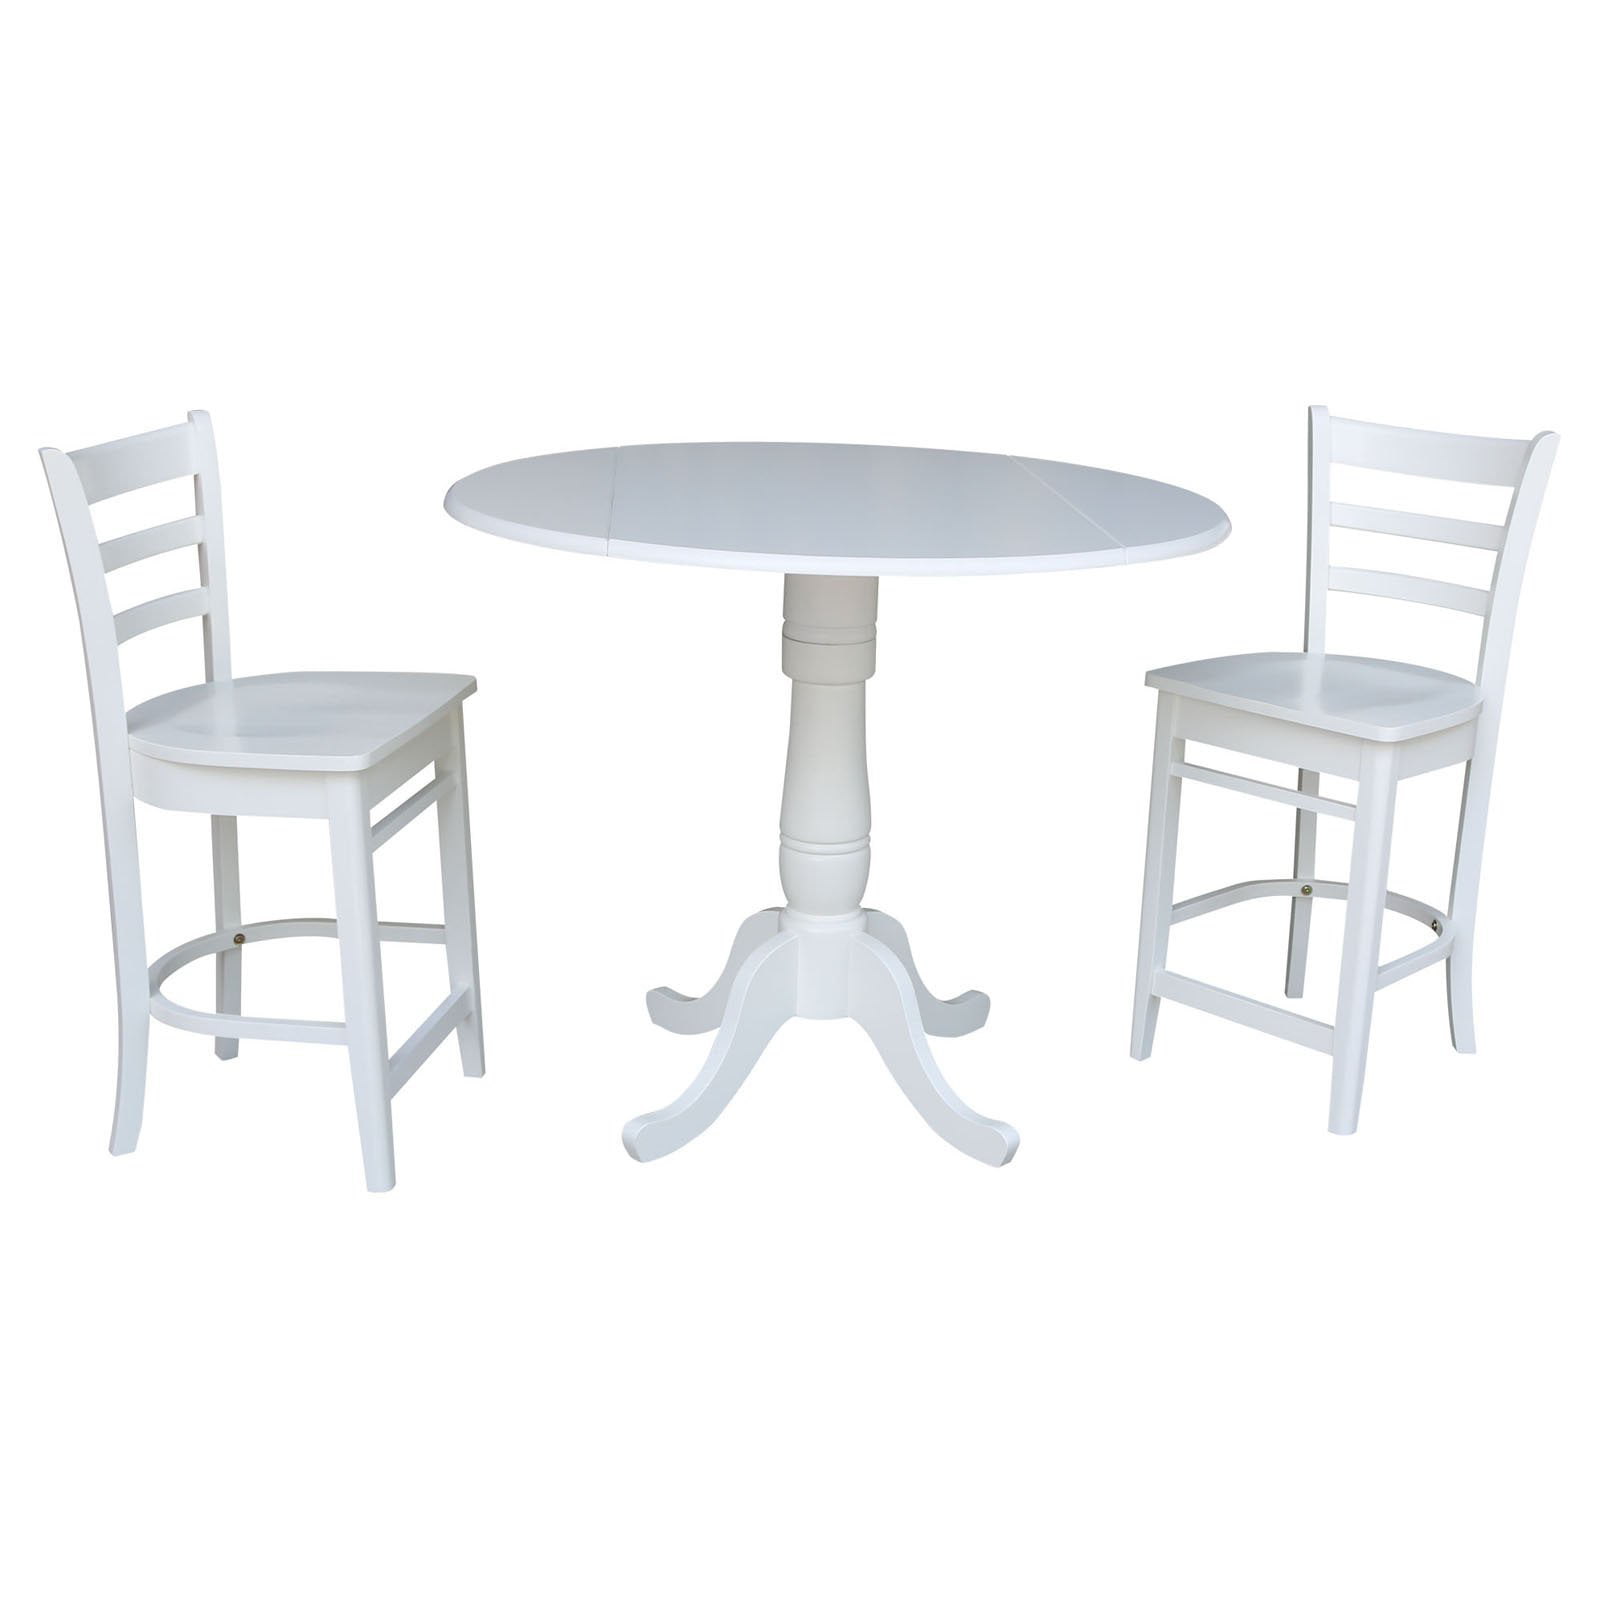 International Concepts 42"H Wood Round Top Pedestal Gathering Height Drop Leaf Table with 2 Counter Height Stools - White -Seats 2 Promo